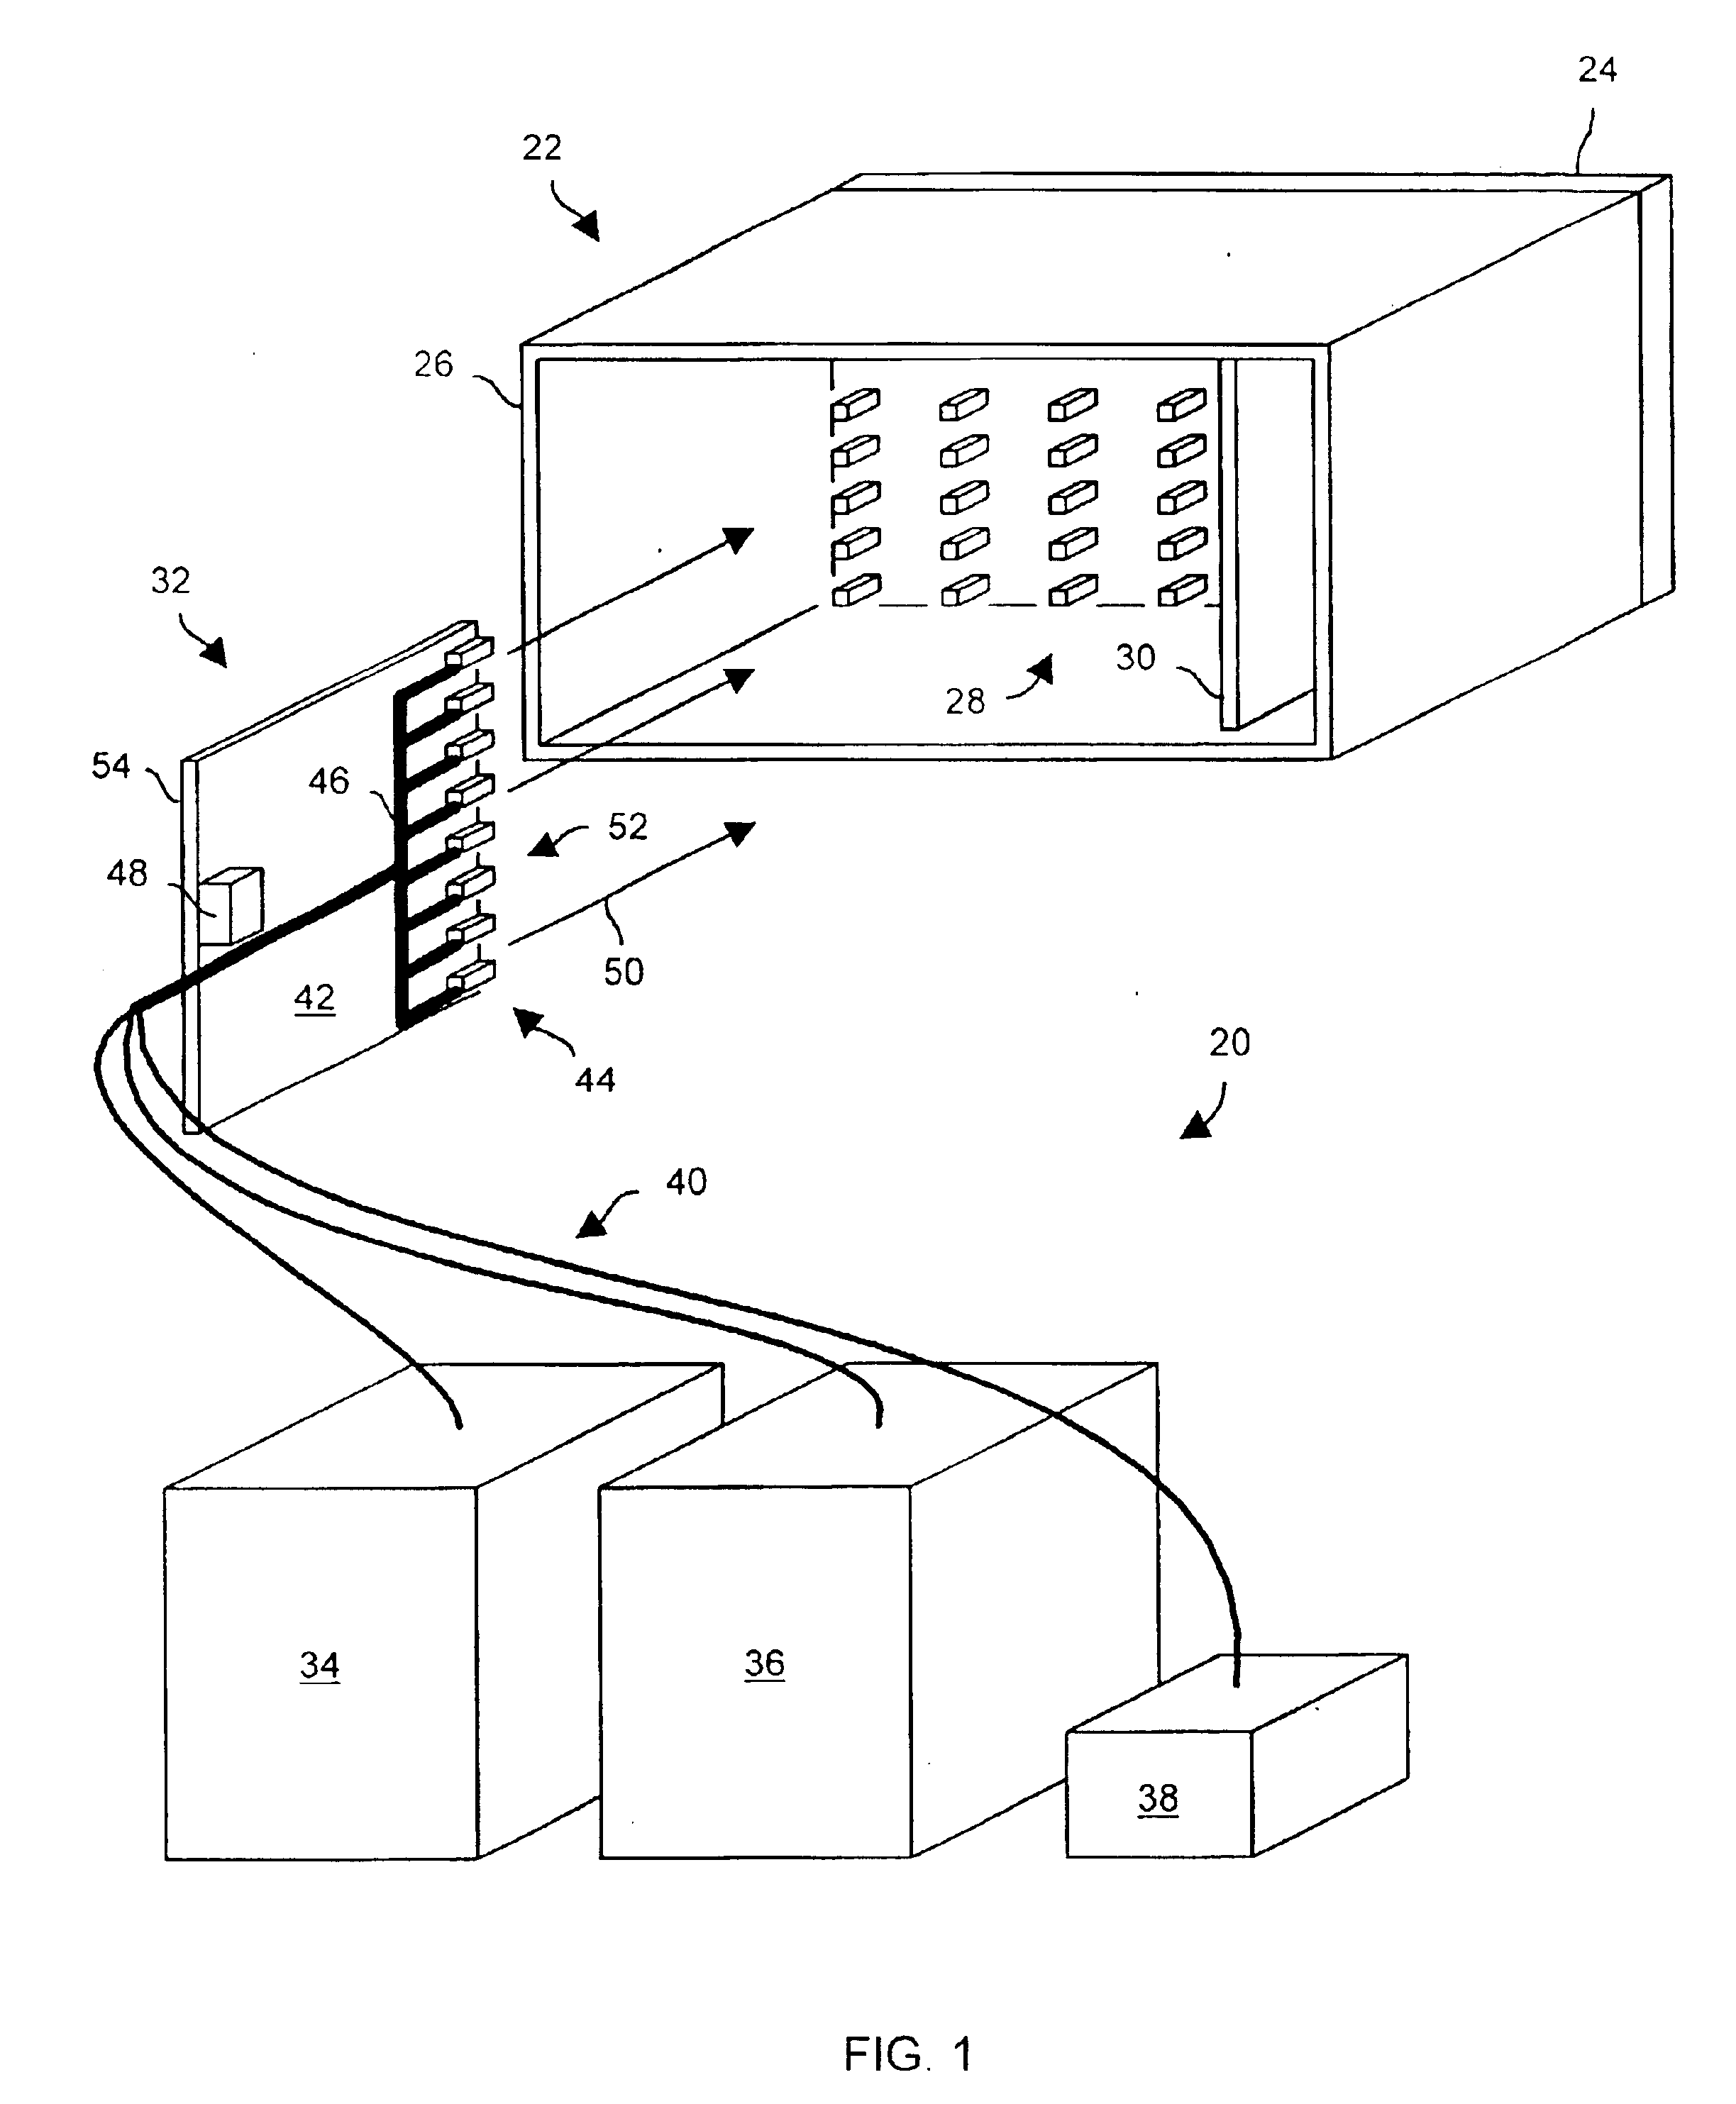 Methods and apparatus for cleaning optical connectors